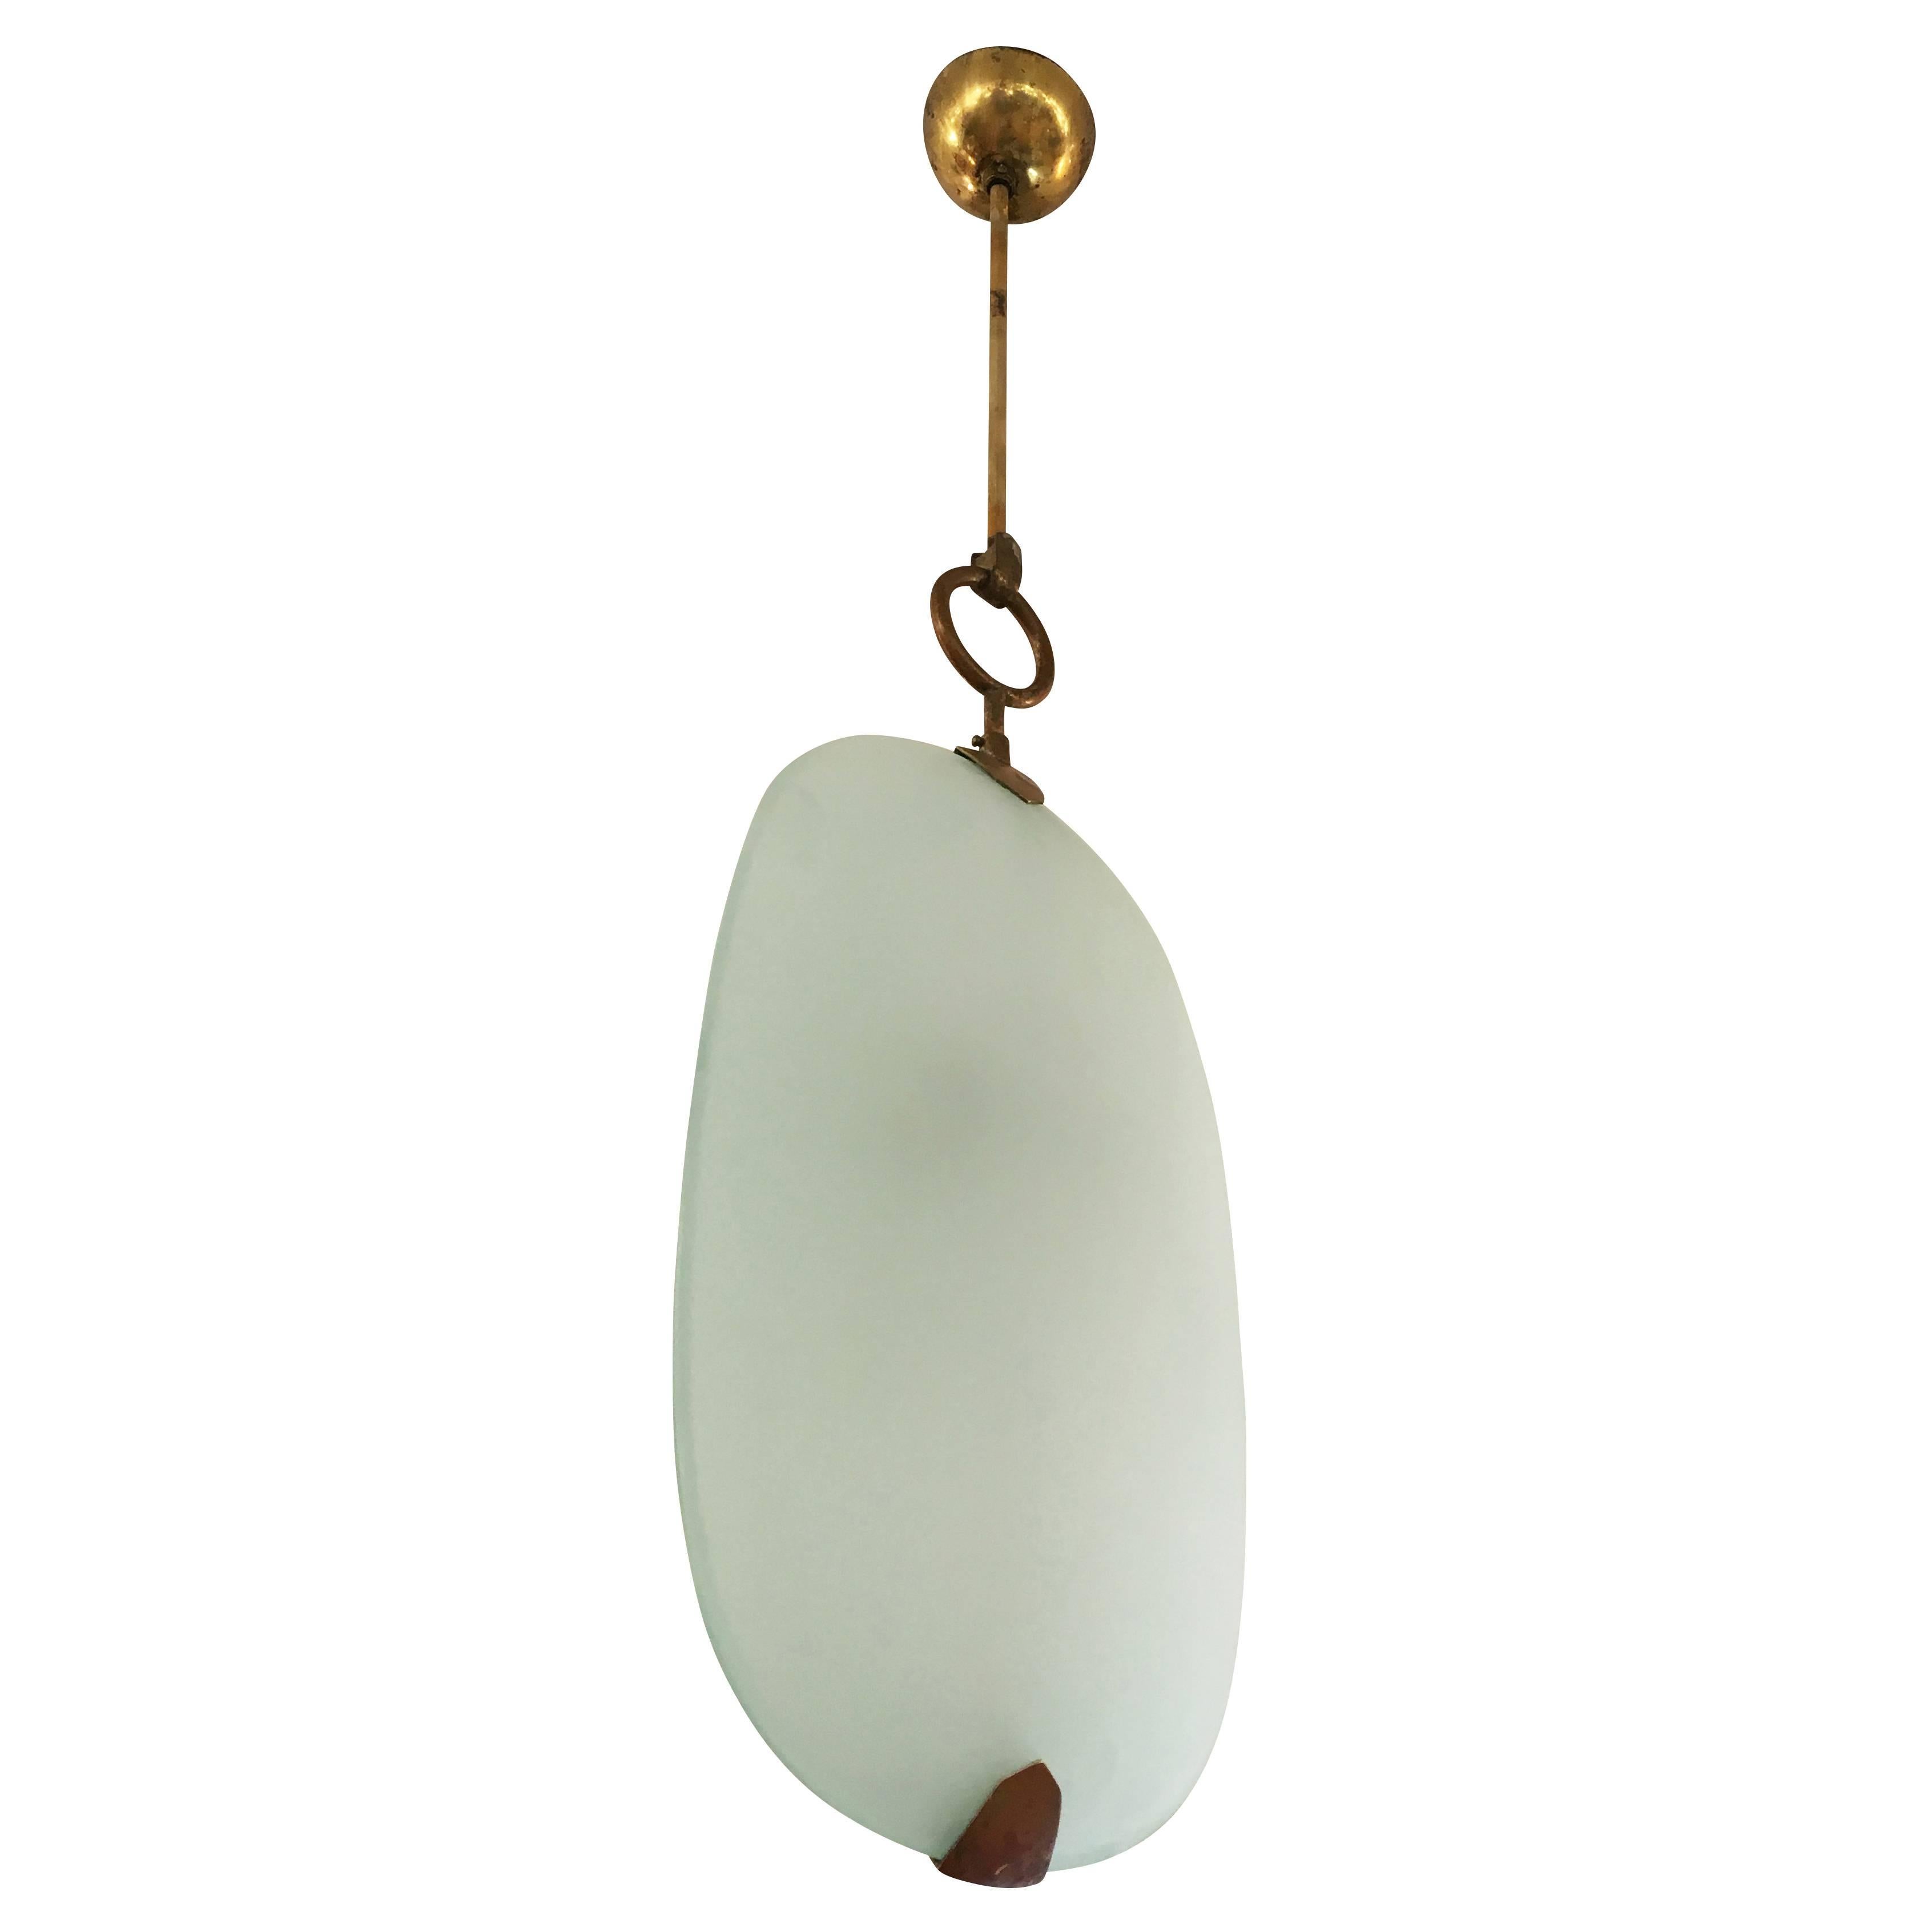 Simple and elegant pendant made by Fontana Arte in the 1960s. The frosted glasses have a slight green tint and rest on a brass frame.

Width: 9